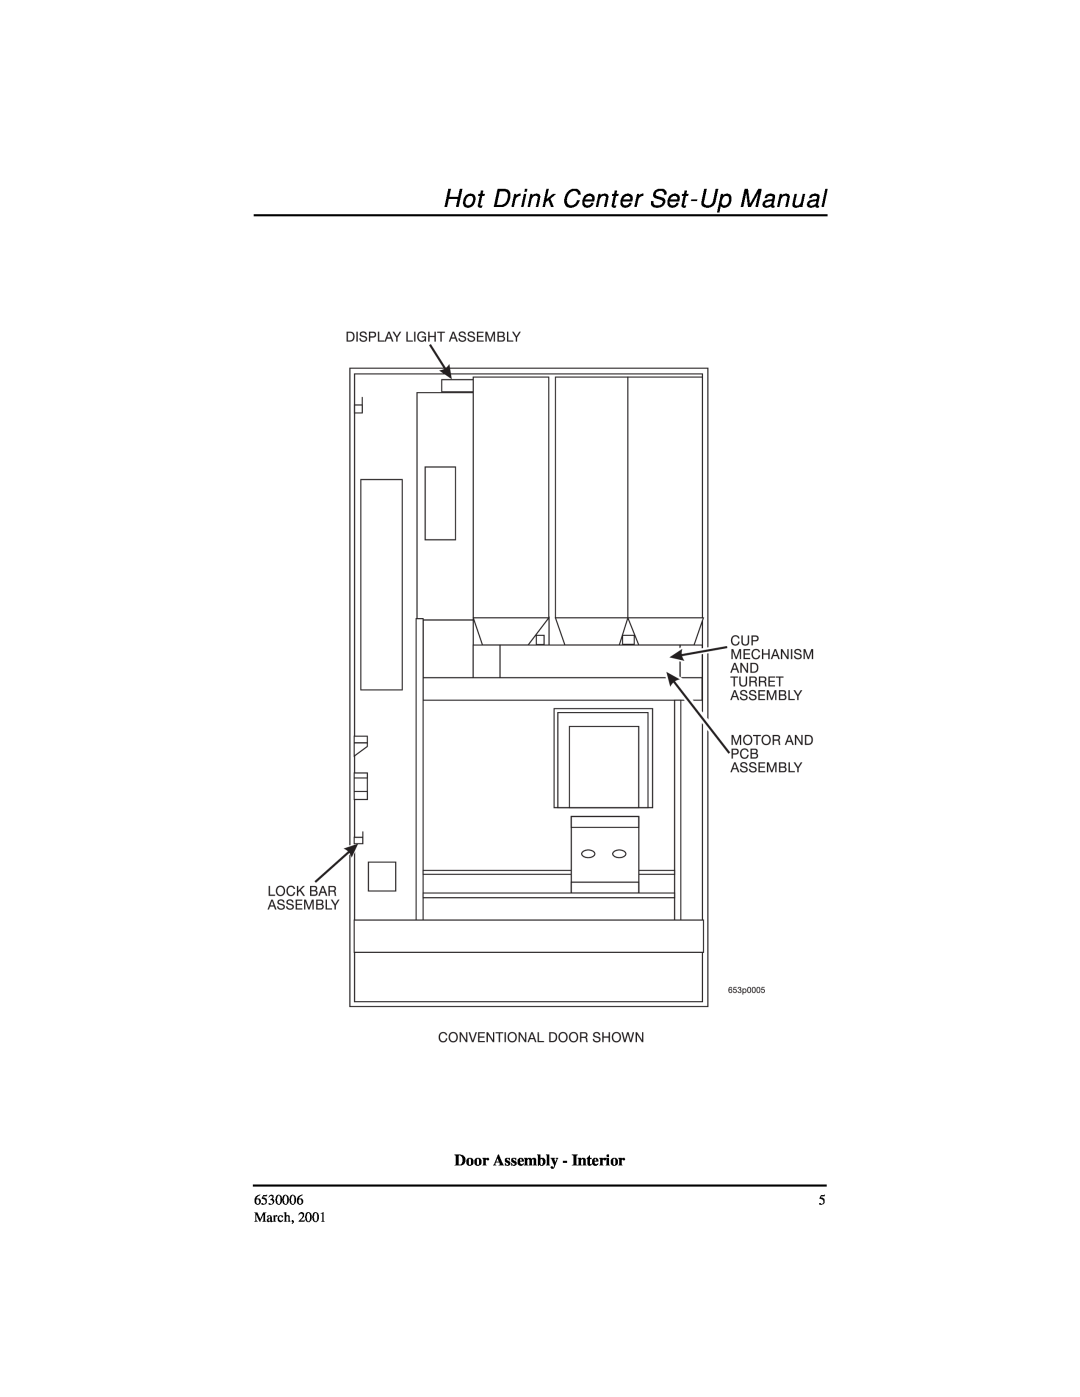 Crane Merchandising Systems 6530006 manual Hot Drink Center Set-Up Manual, Door Assembly - Interior, March 